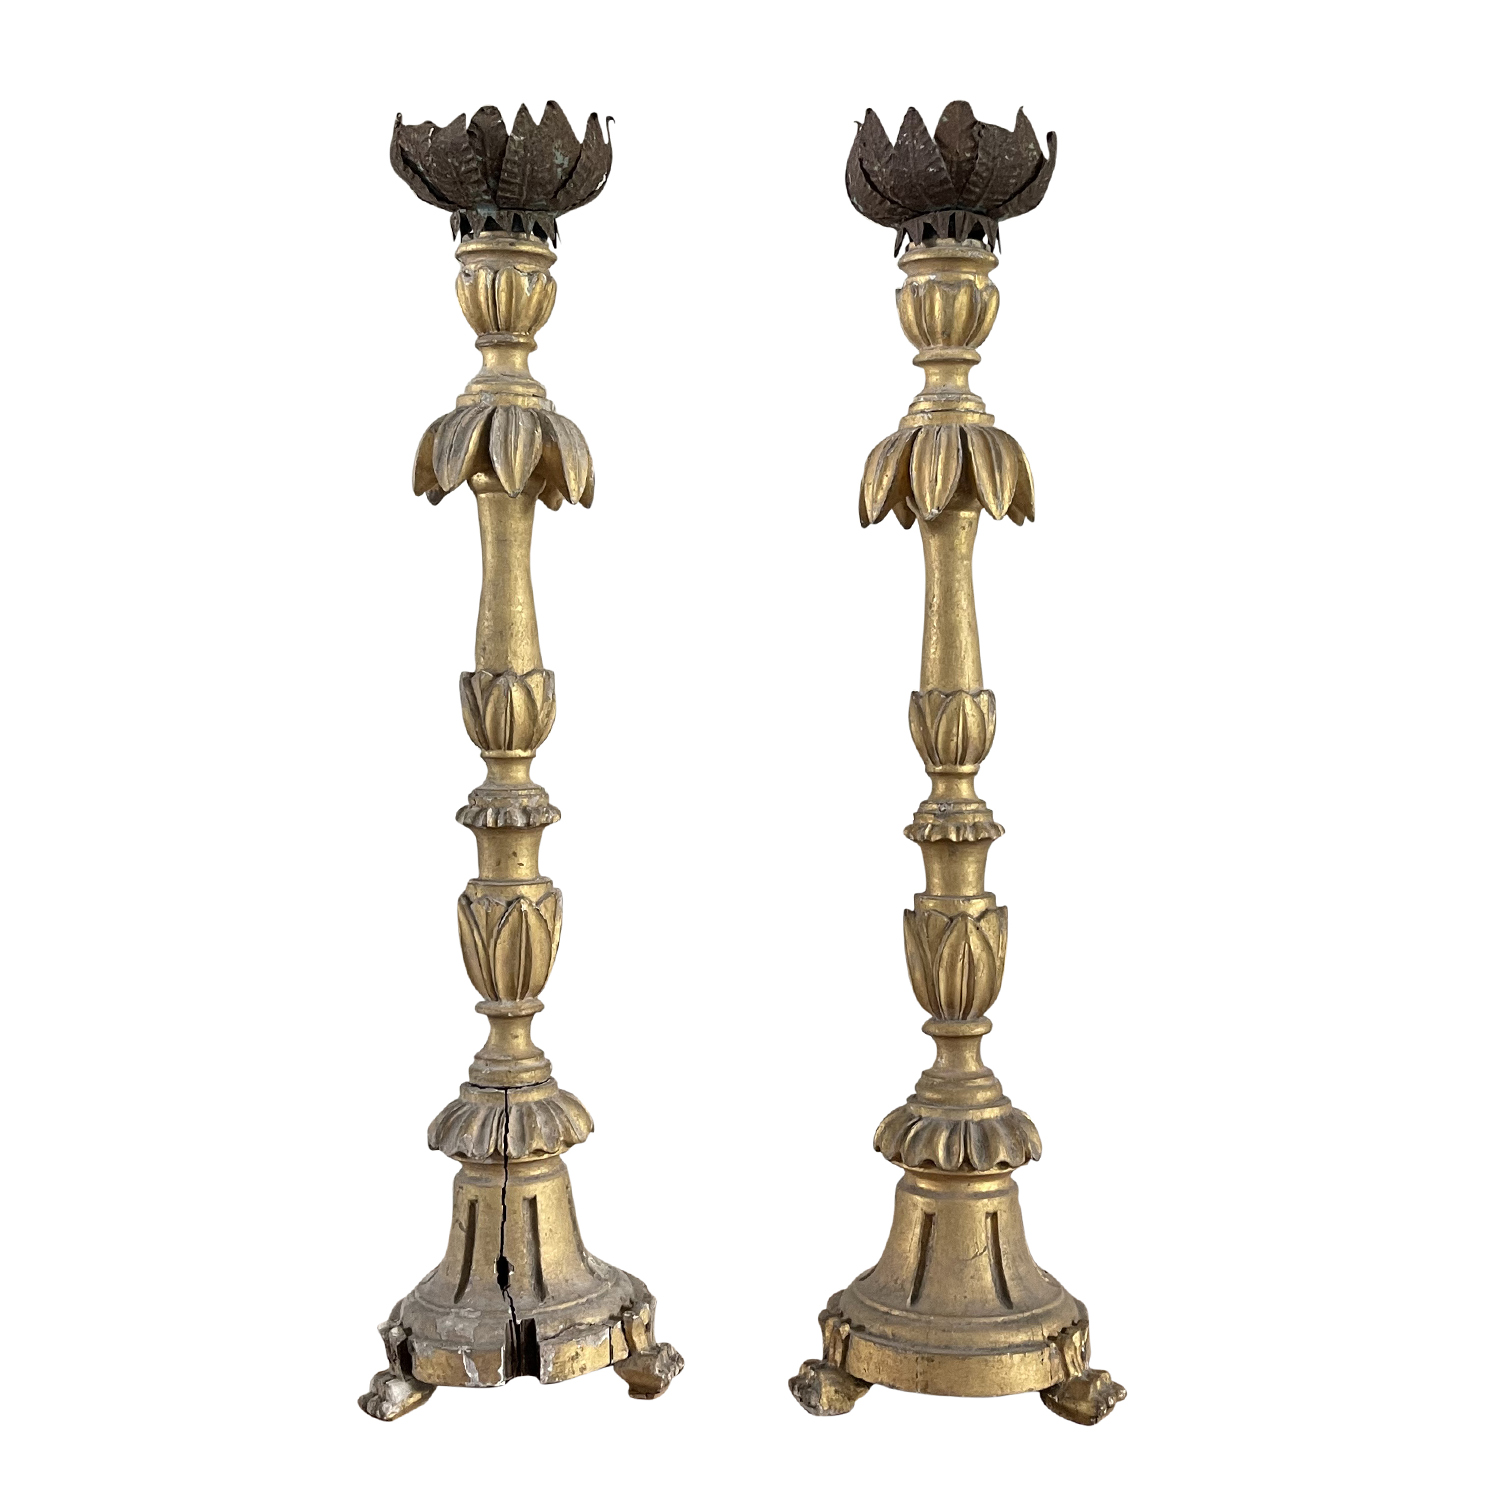 Pair of French Candle Holders 1850